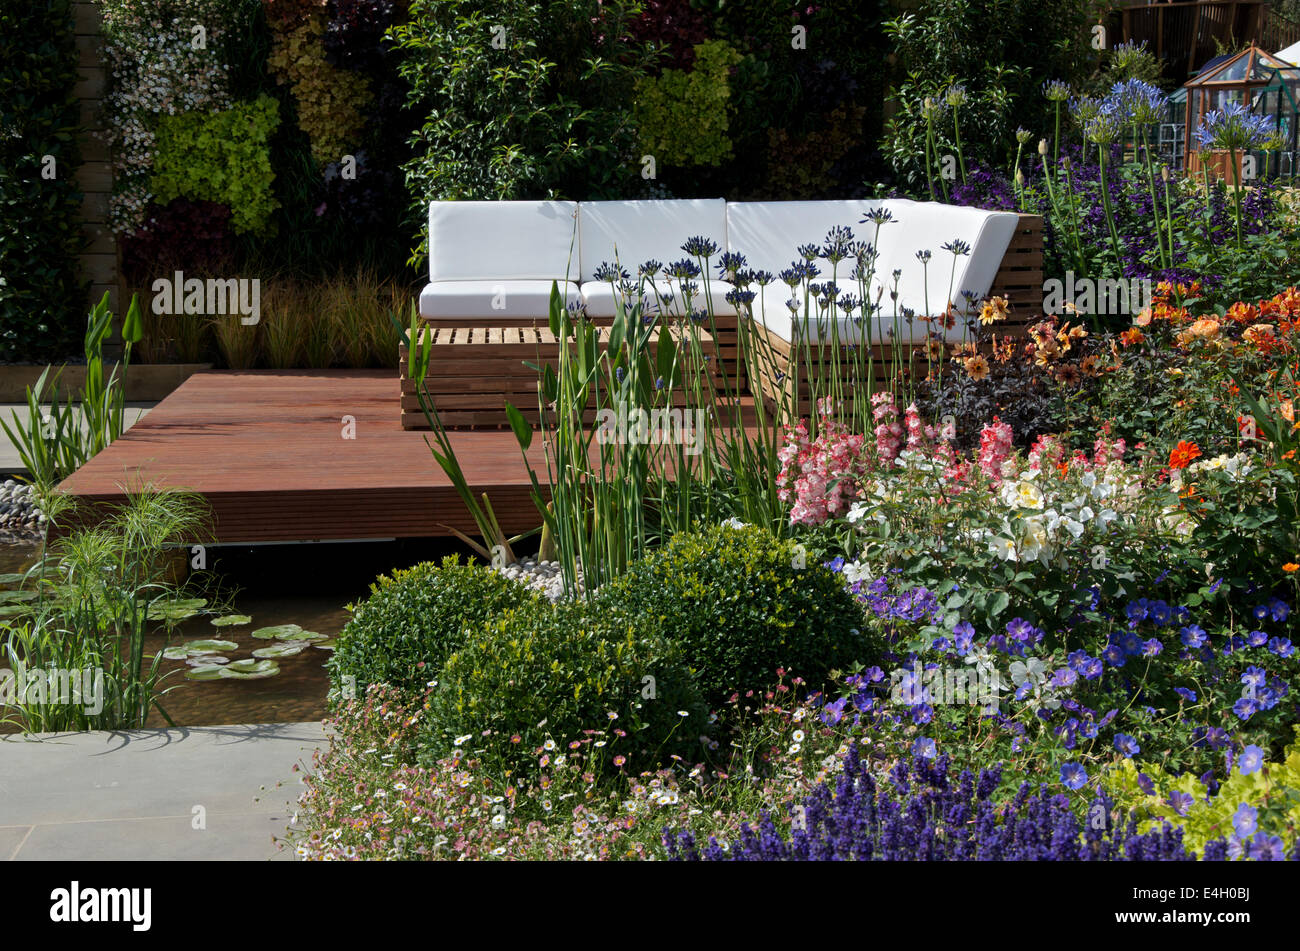 Seating area in A Hampton Garden at RHS Hampton Court Palace Flower Show 2014. Stock Photo